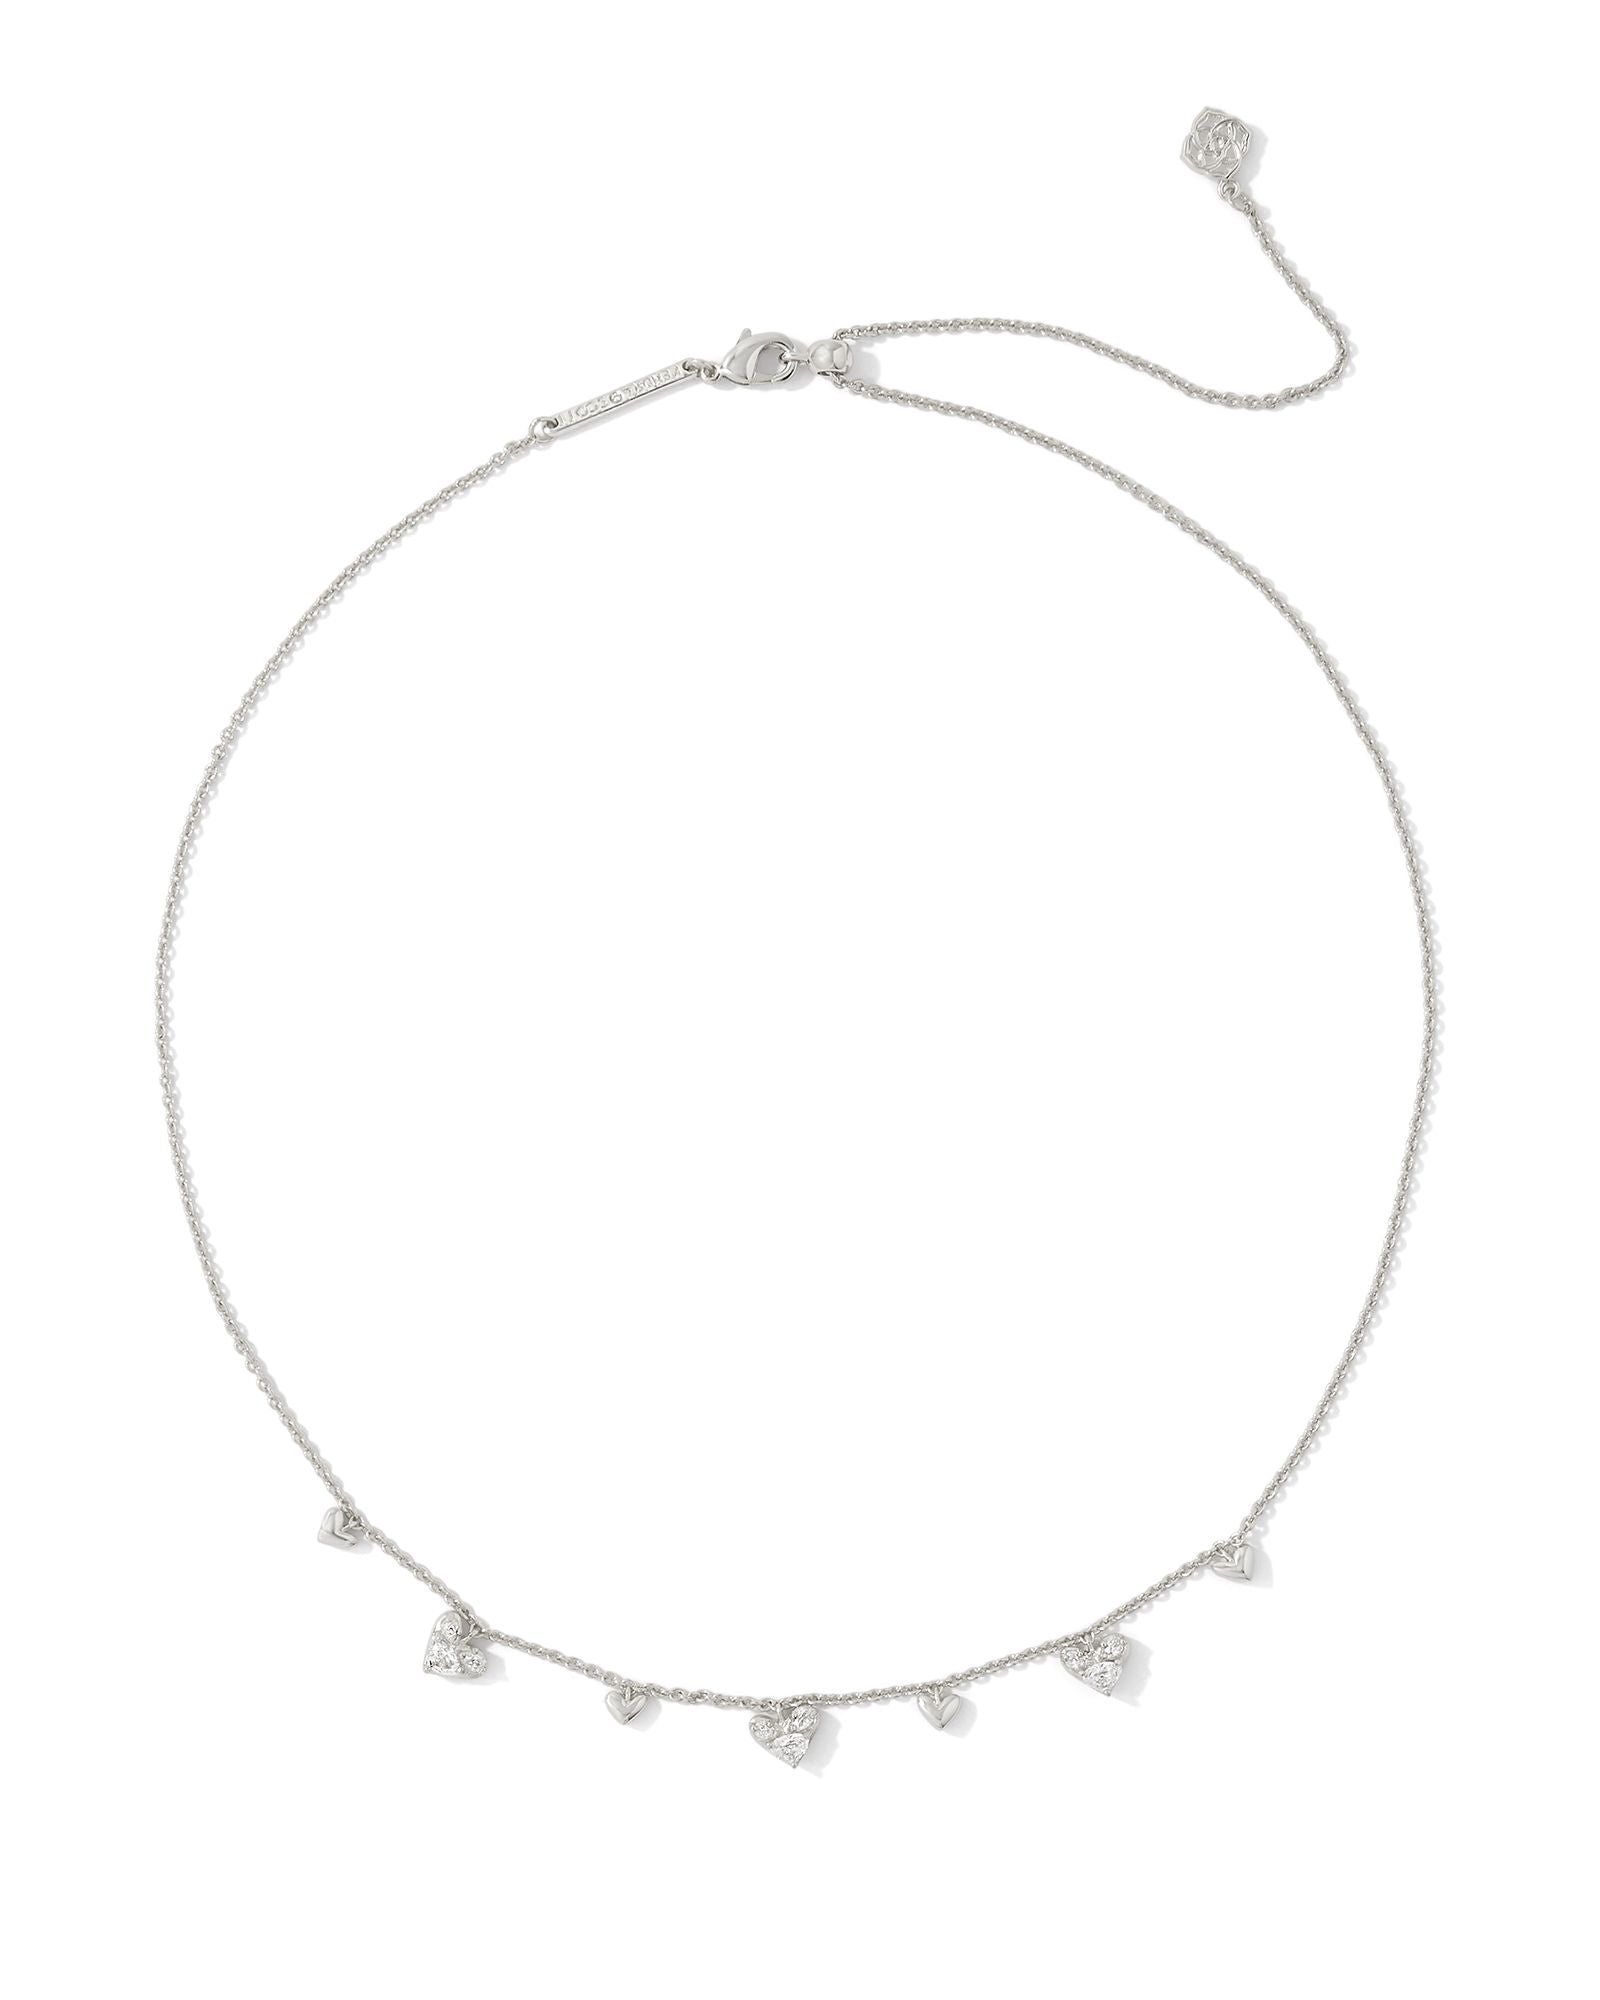 Sale Haven Silver Heart Crystal Choker Necklace White Crystal